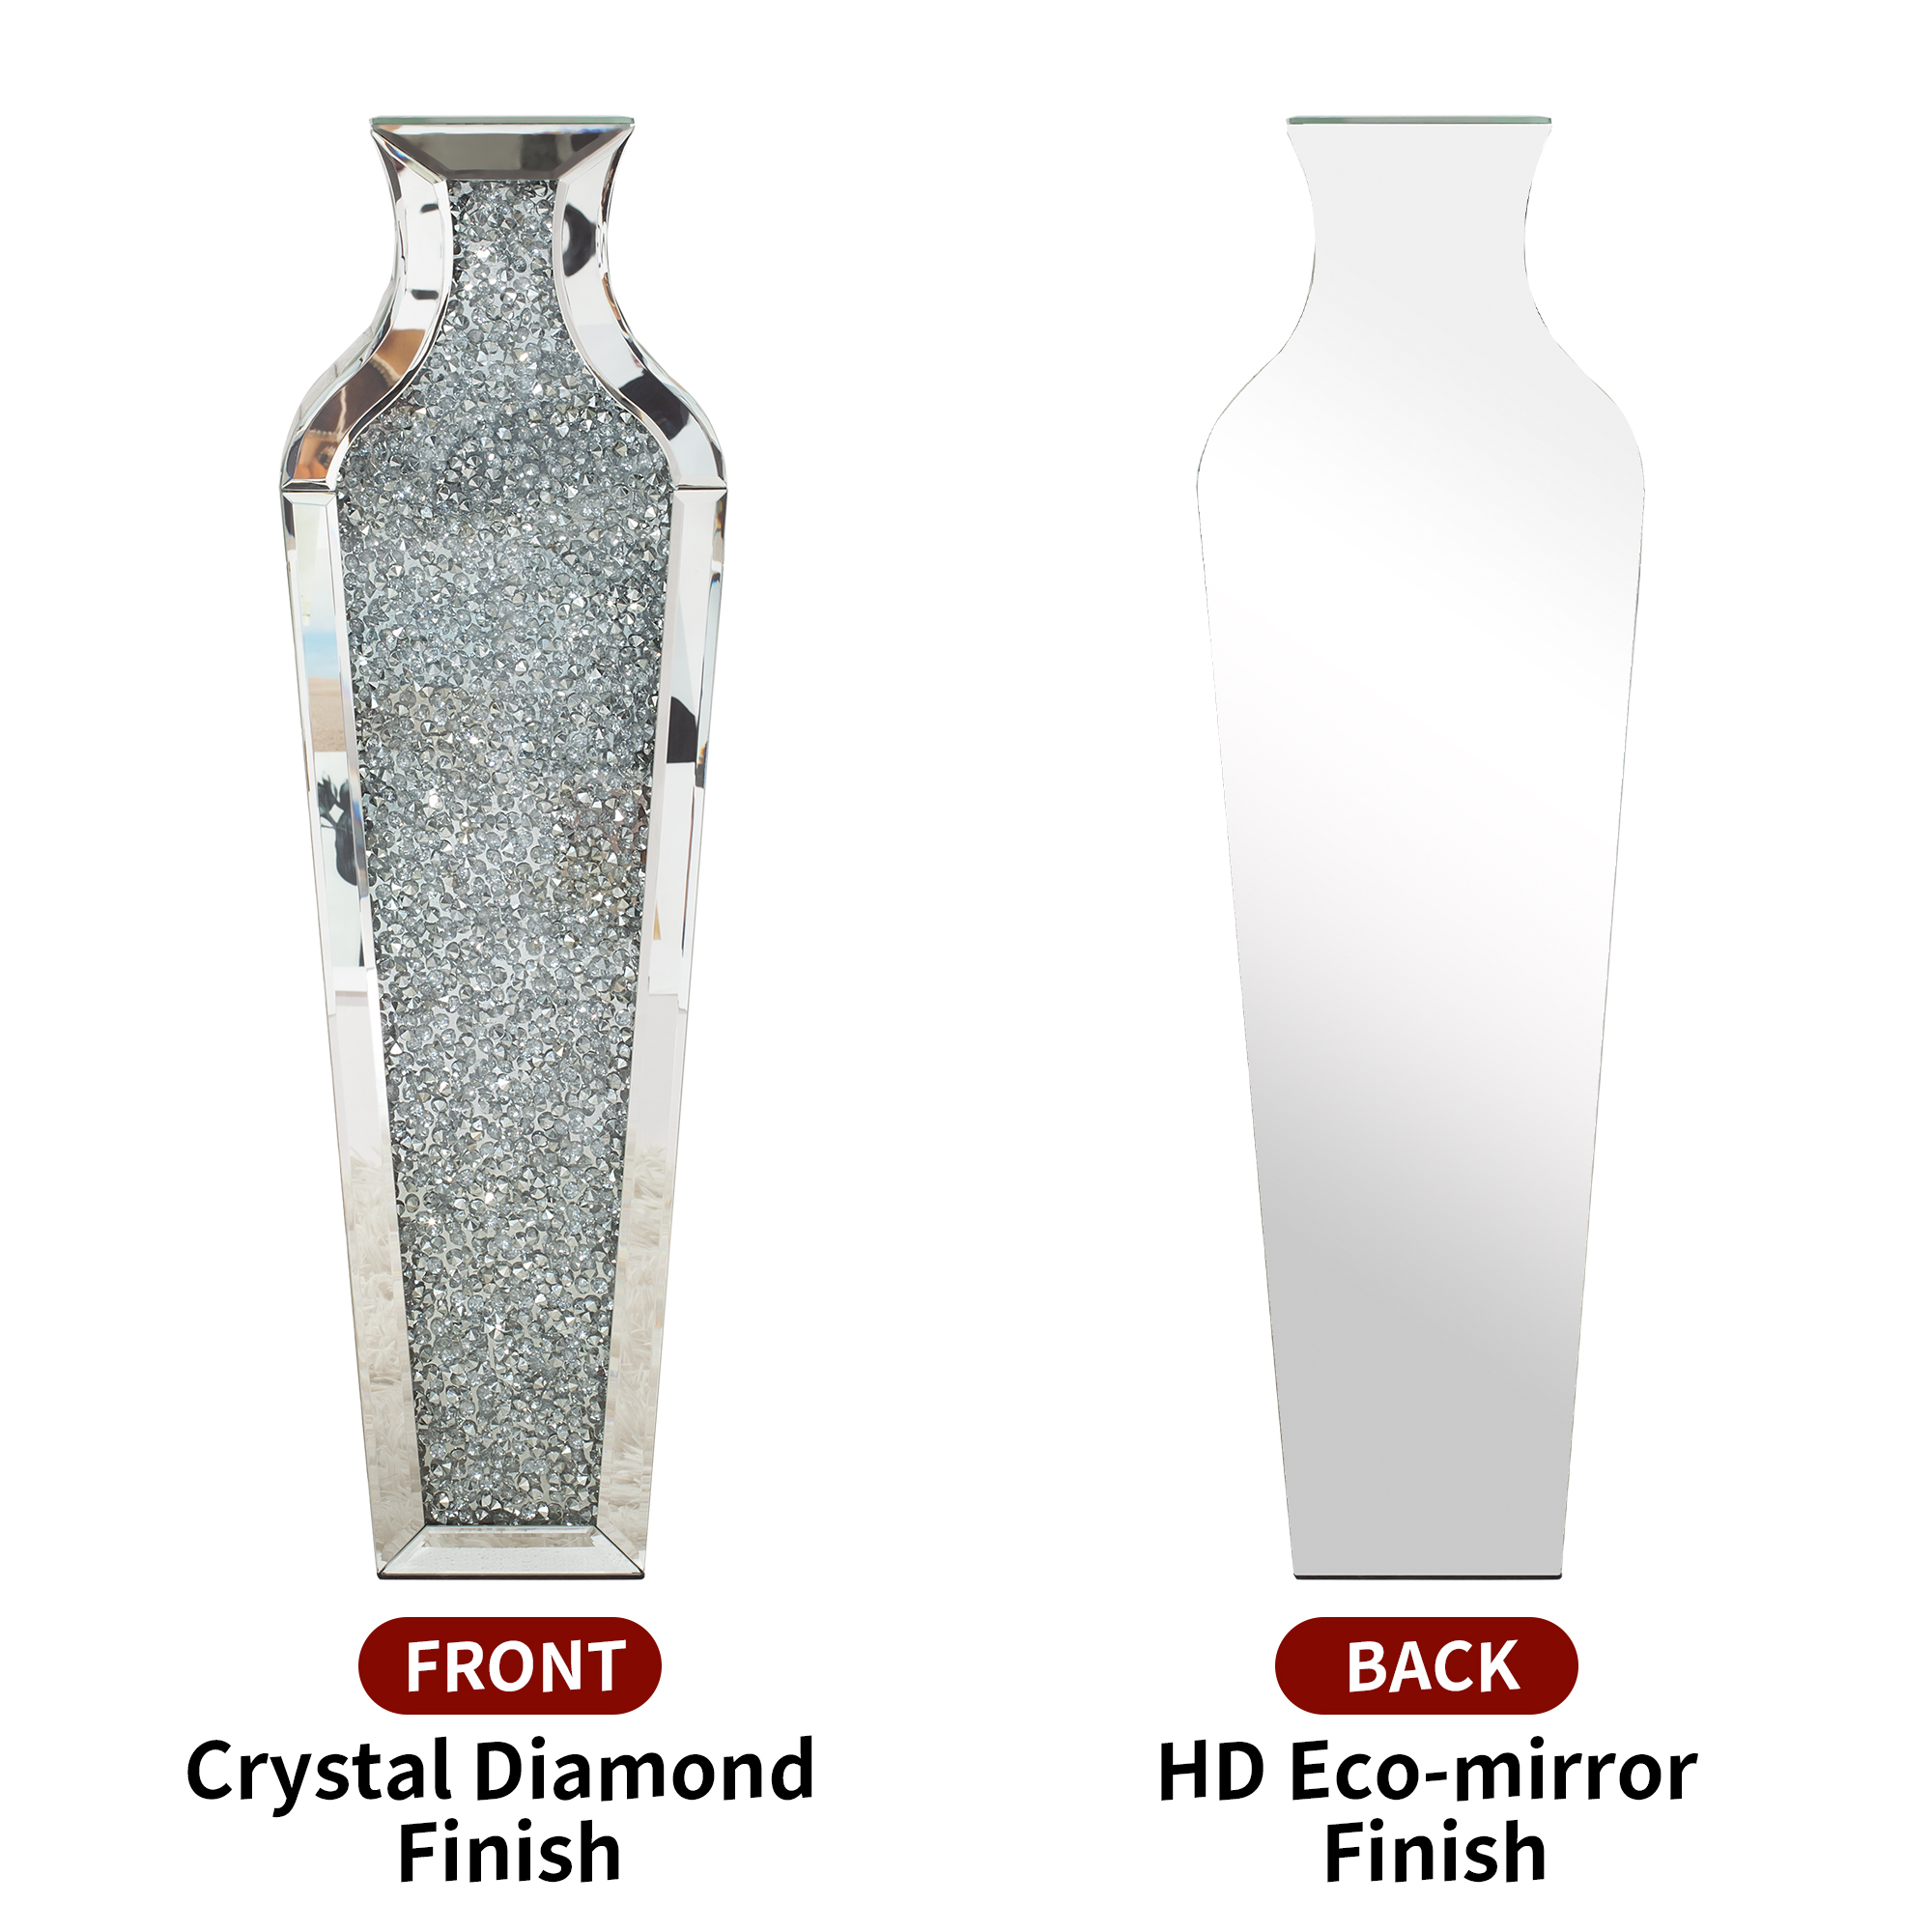 SHYFOY Tall Crushed Diamond Floor Vase Crystal Mirrored Flowers Floor Vase Glass Vases for Centerpieces Home Decor, 26.8 inch Tall - image 5 of 8